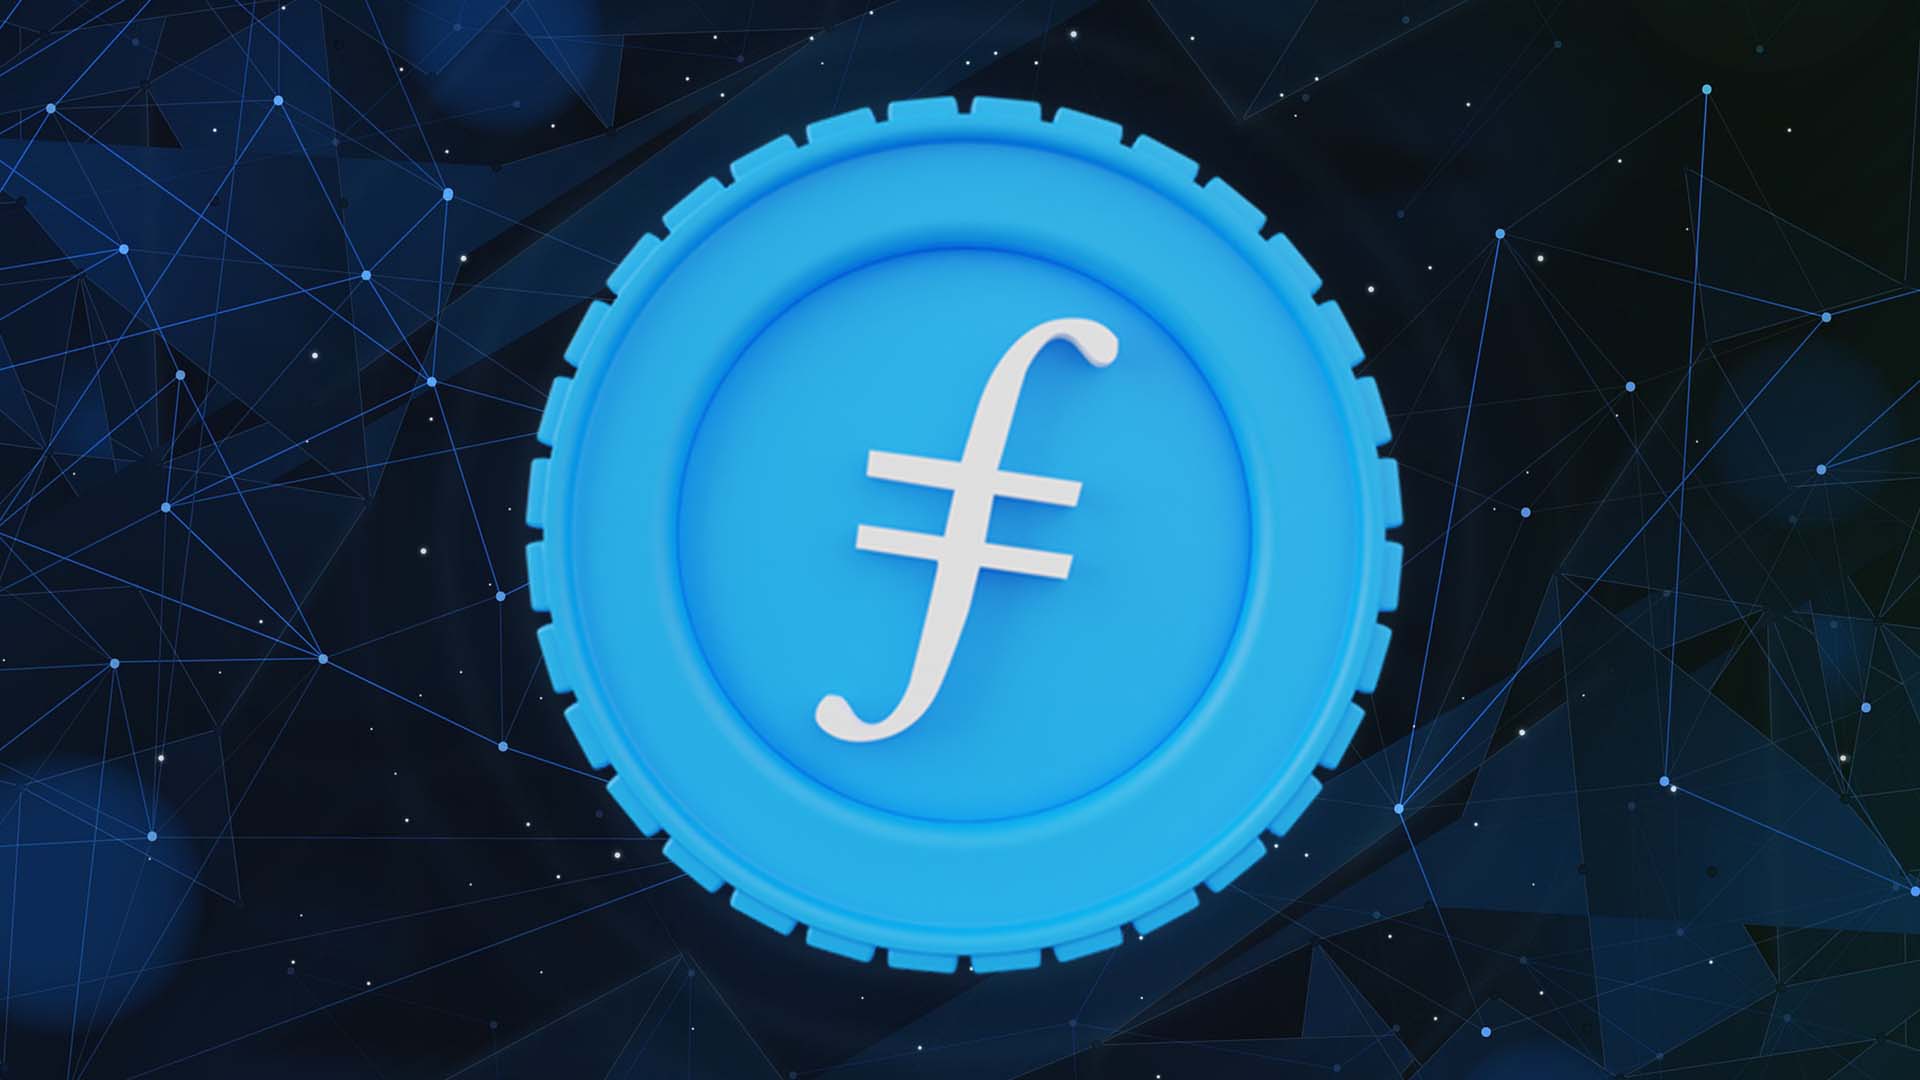 Filecoin price prediction: Is it Possible for a FIL Bull to Meet $10 by the End of 2022?